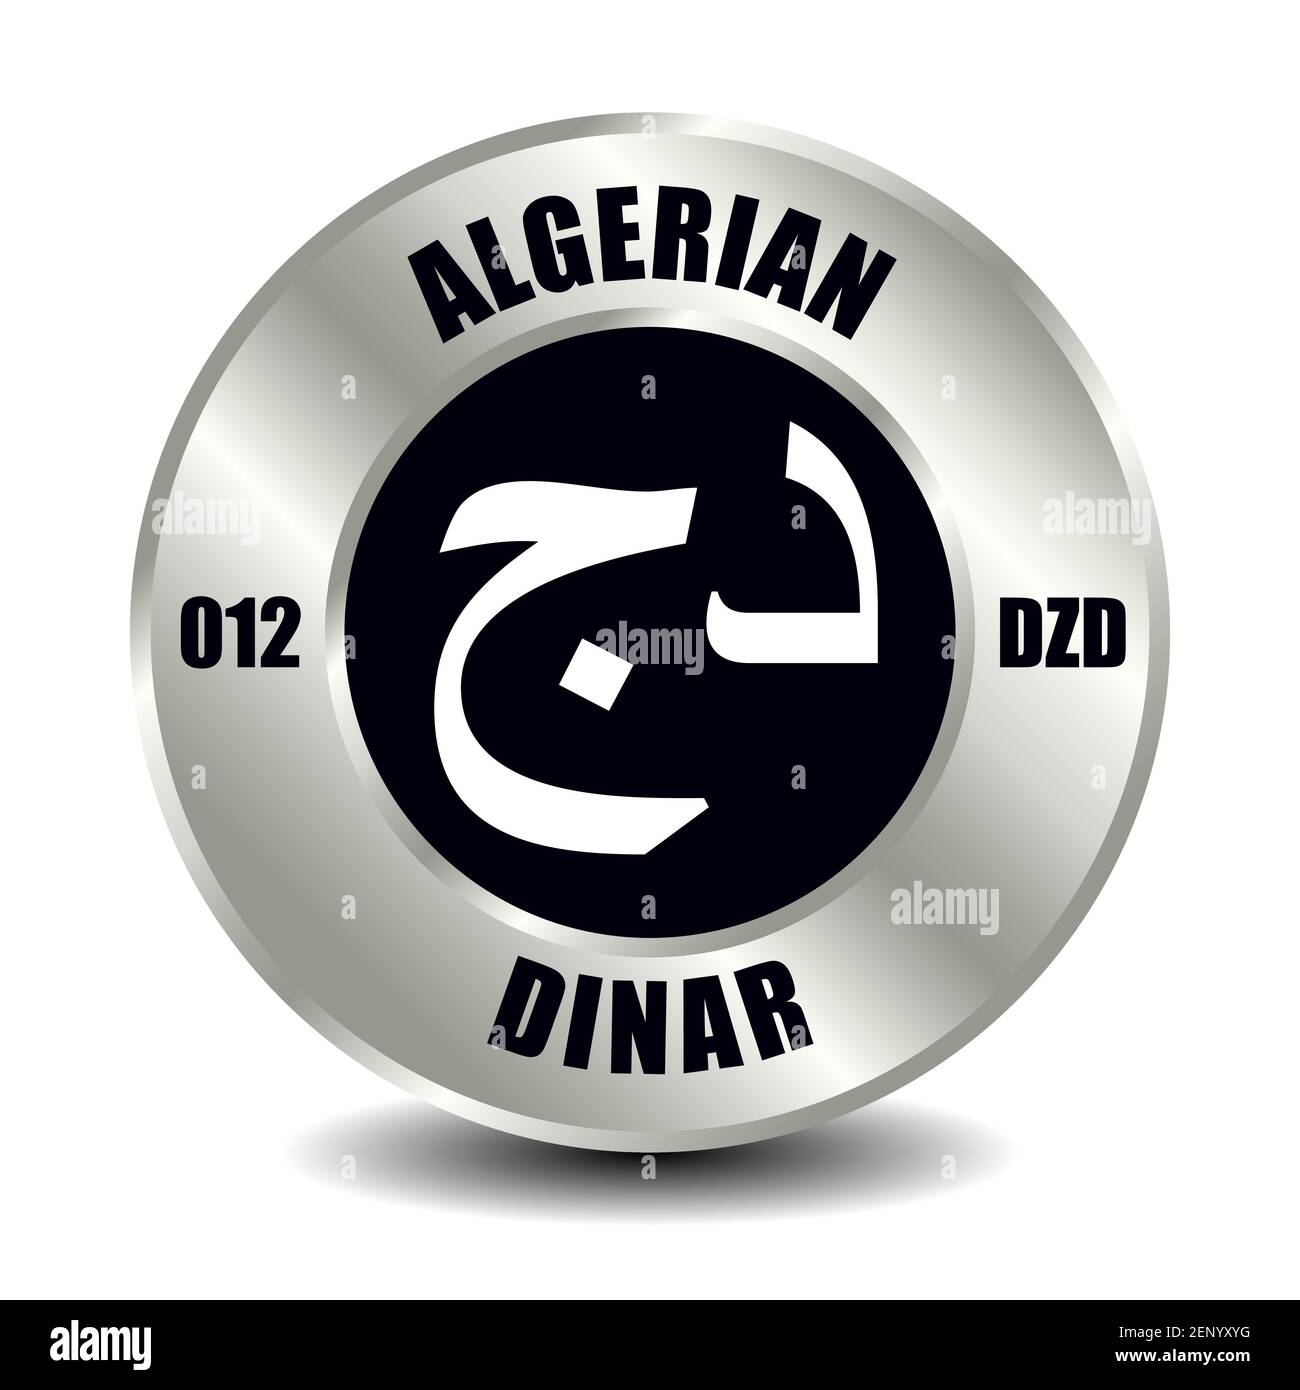 Algeria money icon isolated on round silver coin. Vector sign of currency symbol with international ISO code and abbreviation Stock Vector